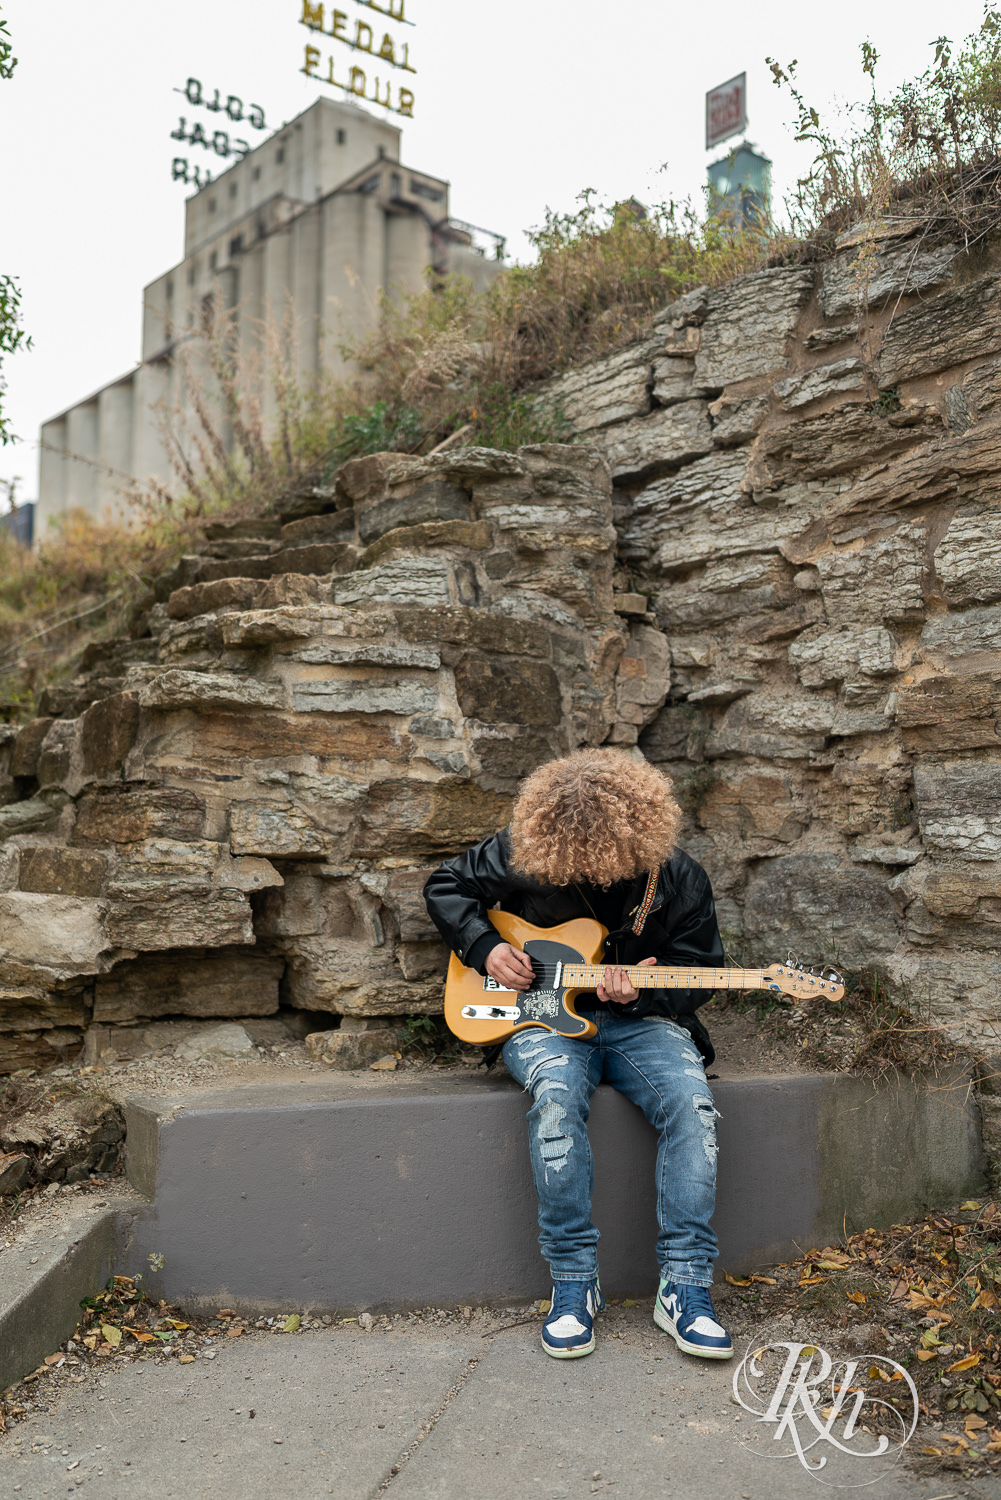 Senior boy playing dressed in leather and jeans plays guitar in Mill City Ruins in Minneapolis, Minnesota.